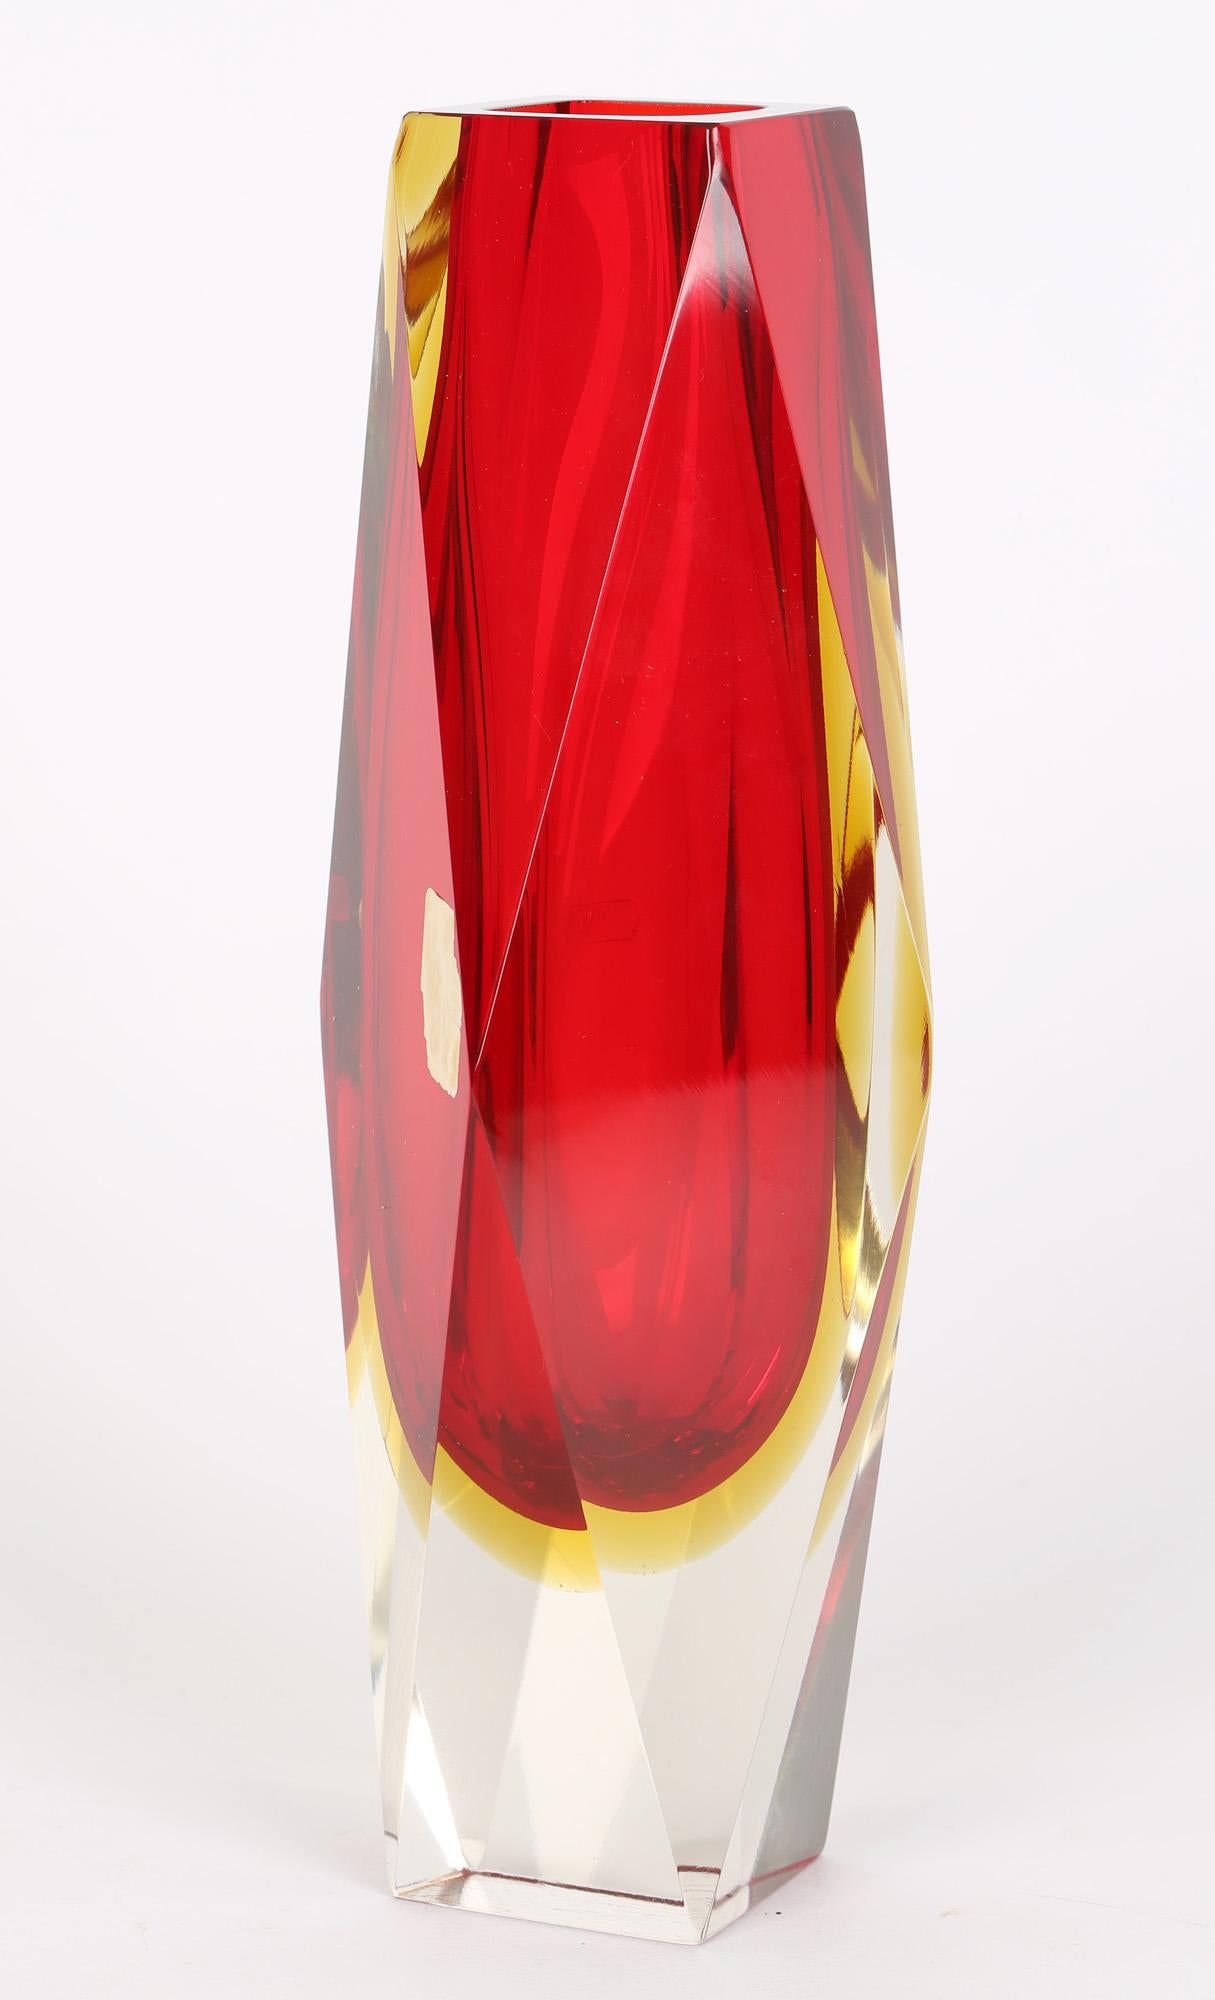 Pagnin & Bon Italian Murano Red and Yellow Sommerso Facet Cut Glass Vase For Sale 4